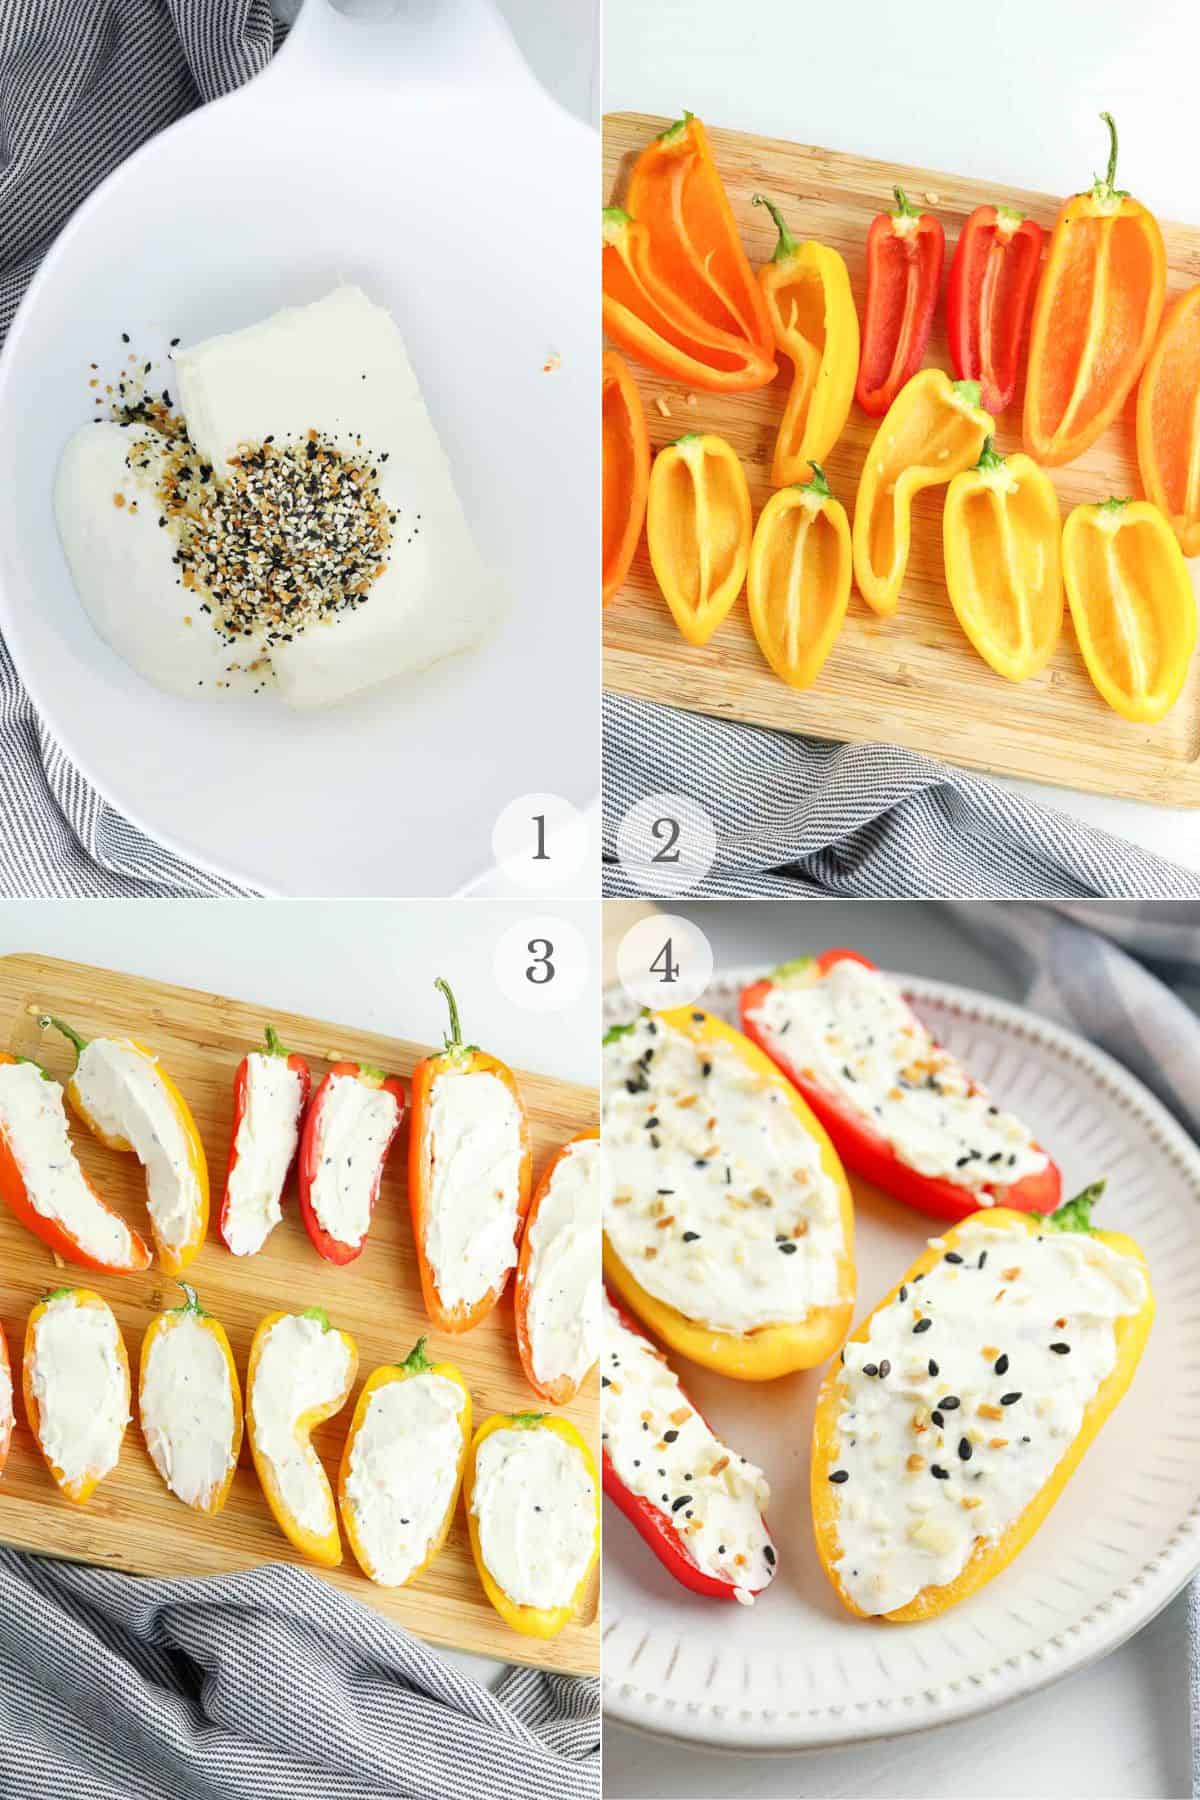 cream cheese stuffed peppers recipe steps collage.